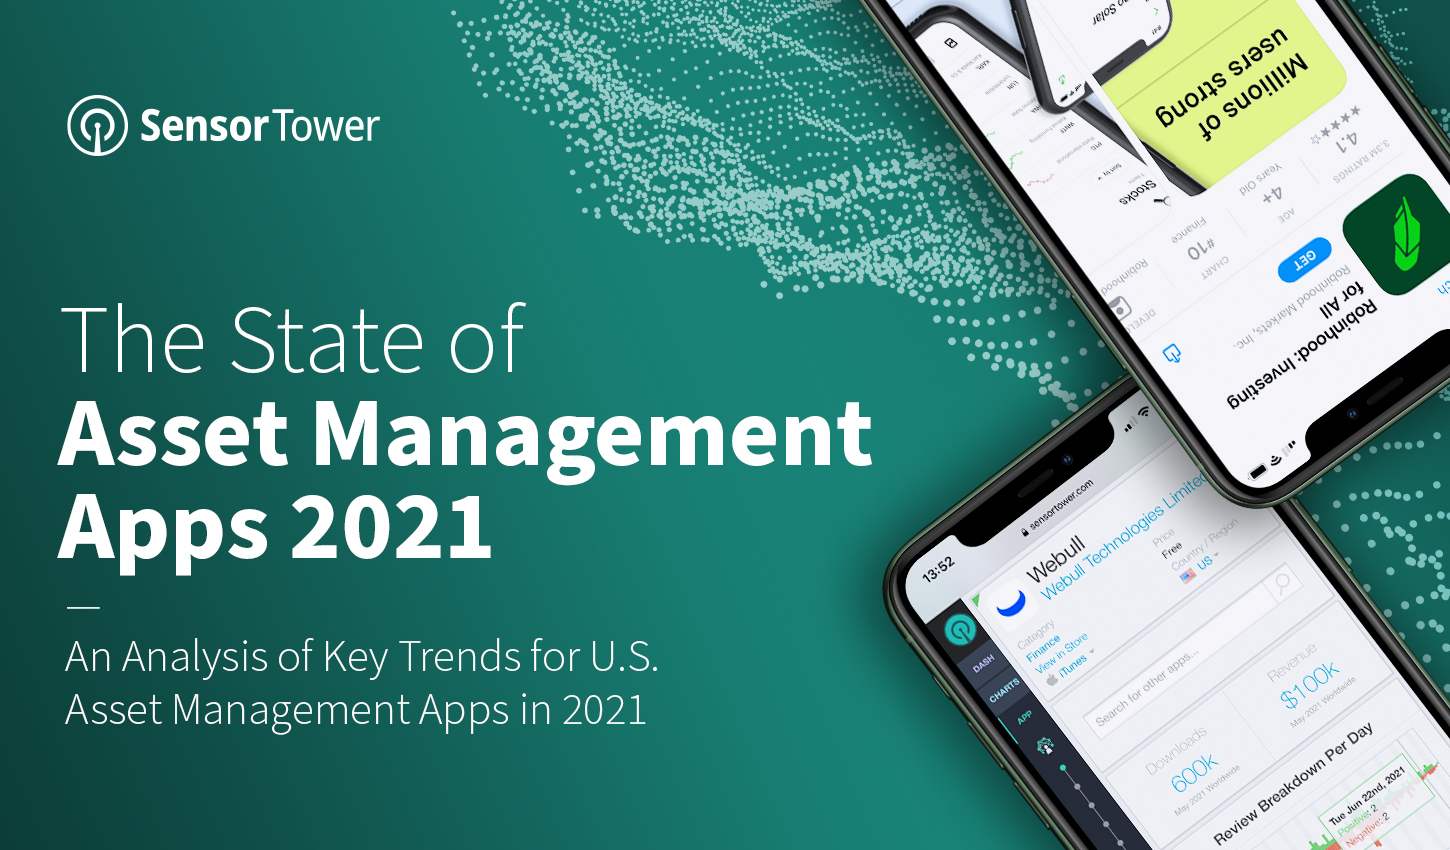 Takeaways from Sensor Tower's 2021 State of Asset Management Apps report.